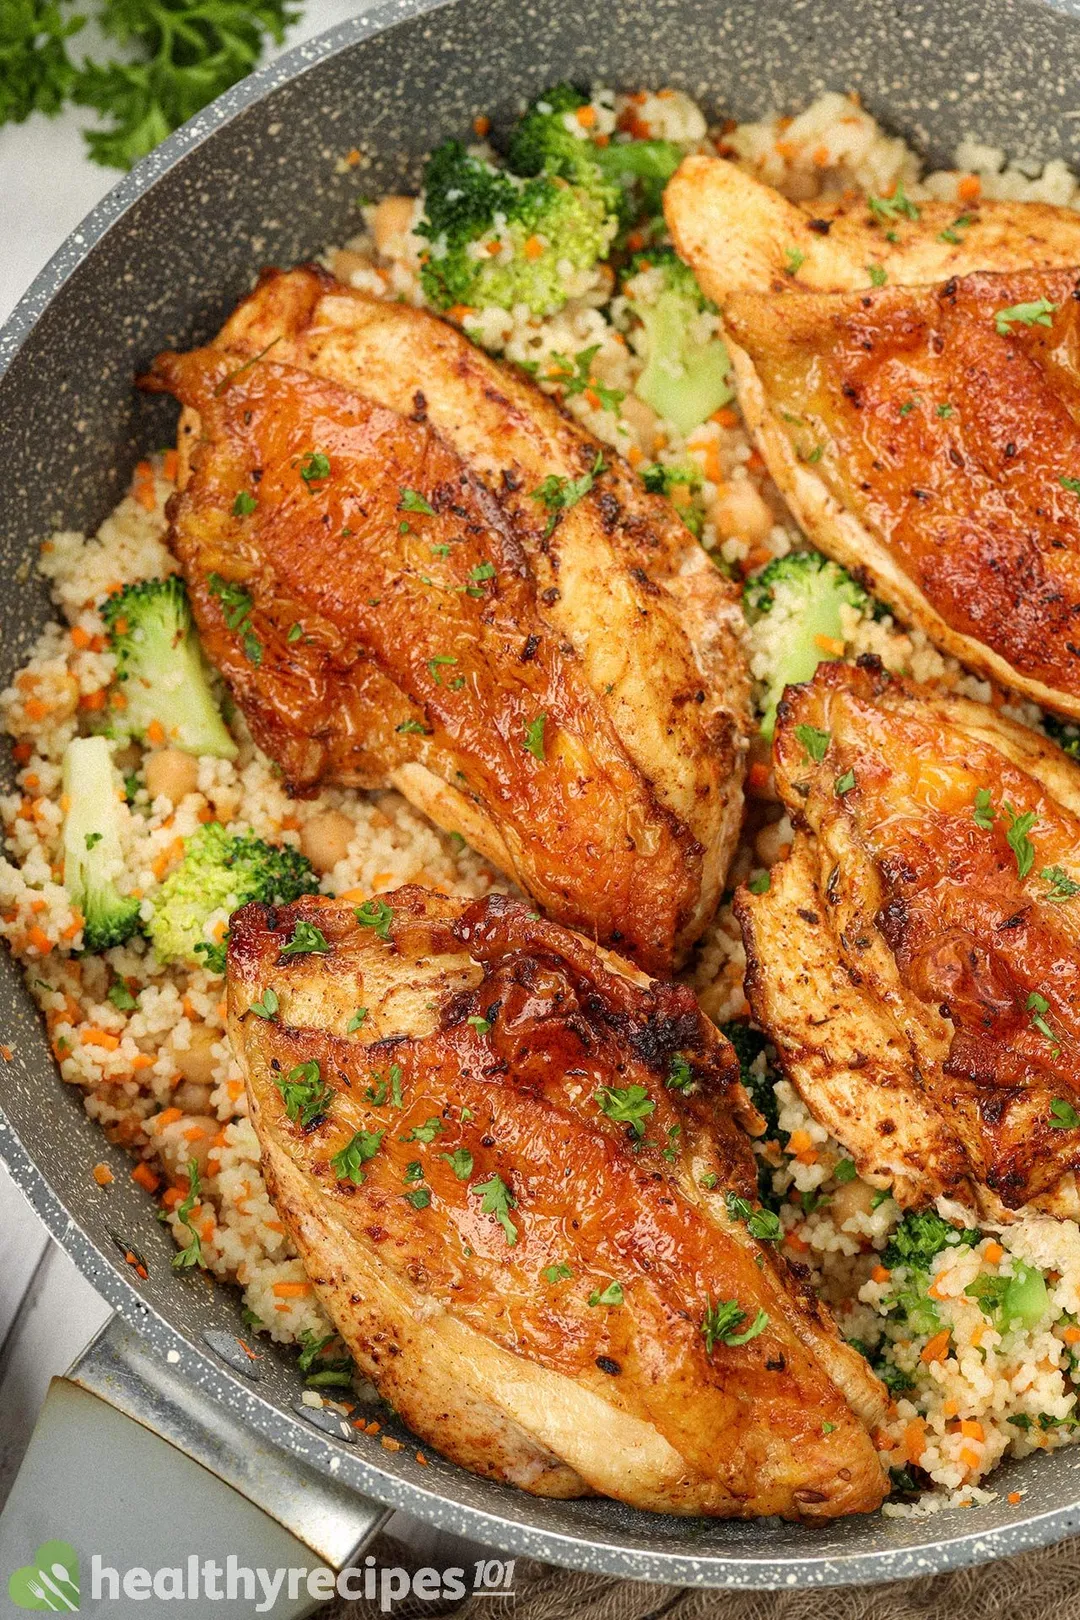 A close-up shot of a large and deep pan filled with cooked couscous, broccoli florets, chickpeas, and browned chicken thighs